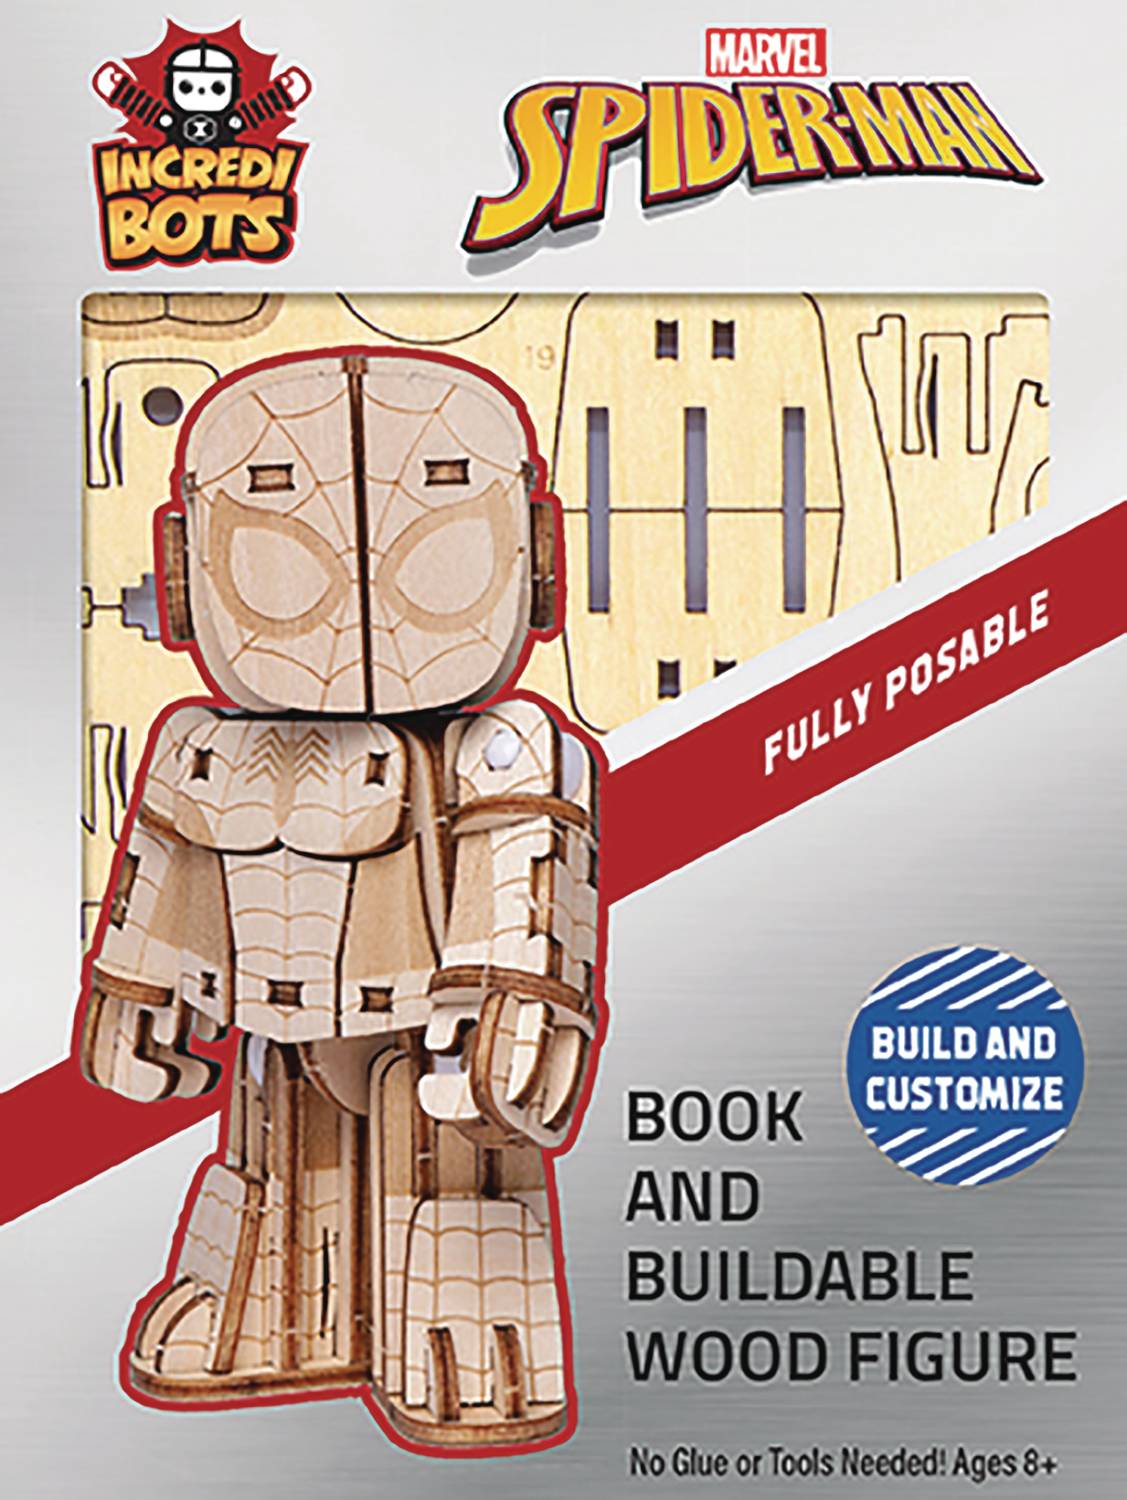 Spider-Man IncrediBots Book And Buildable Wood Figure Marvel